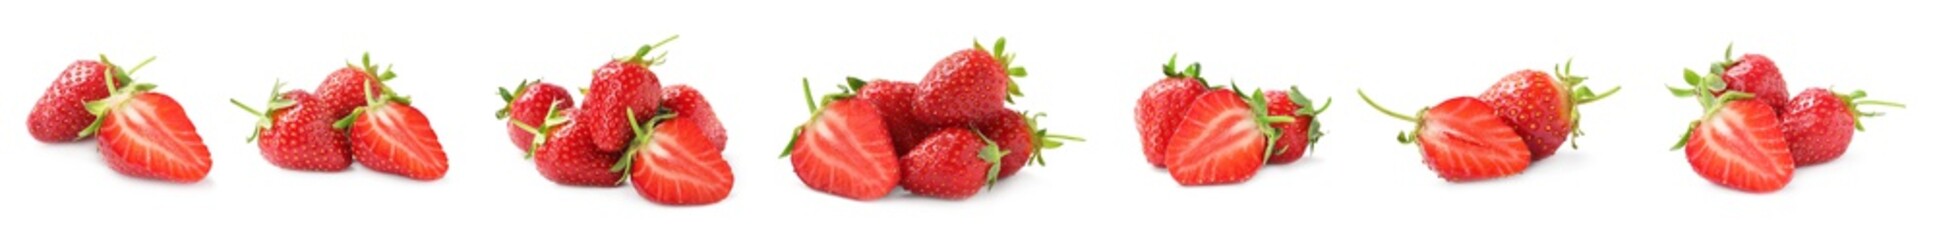 Set of delicious ripe strawberries on white background. Banner design